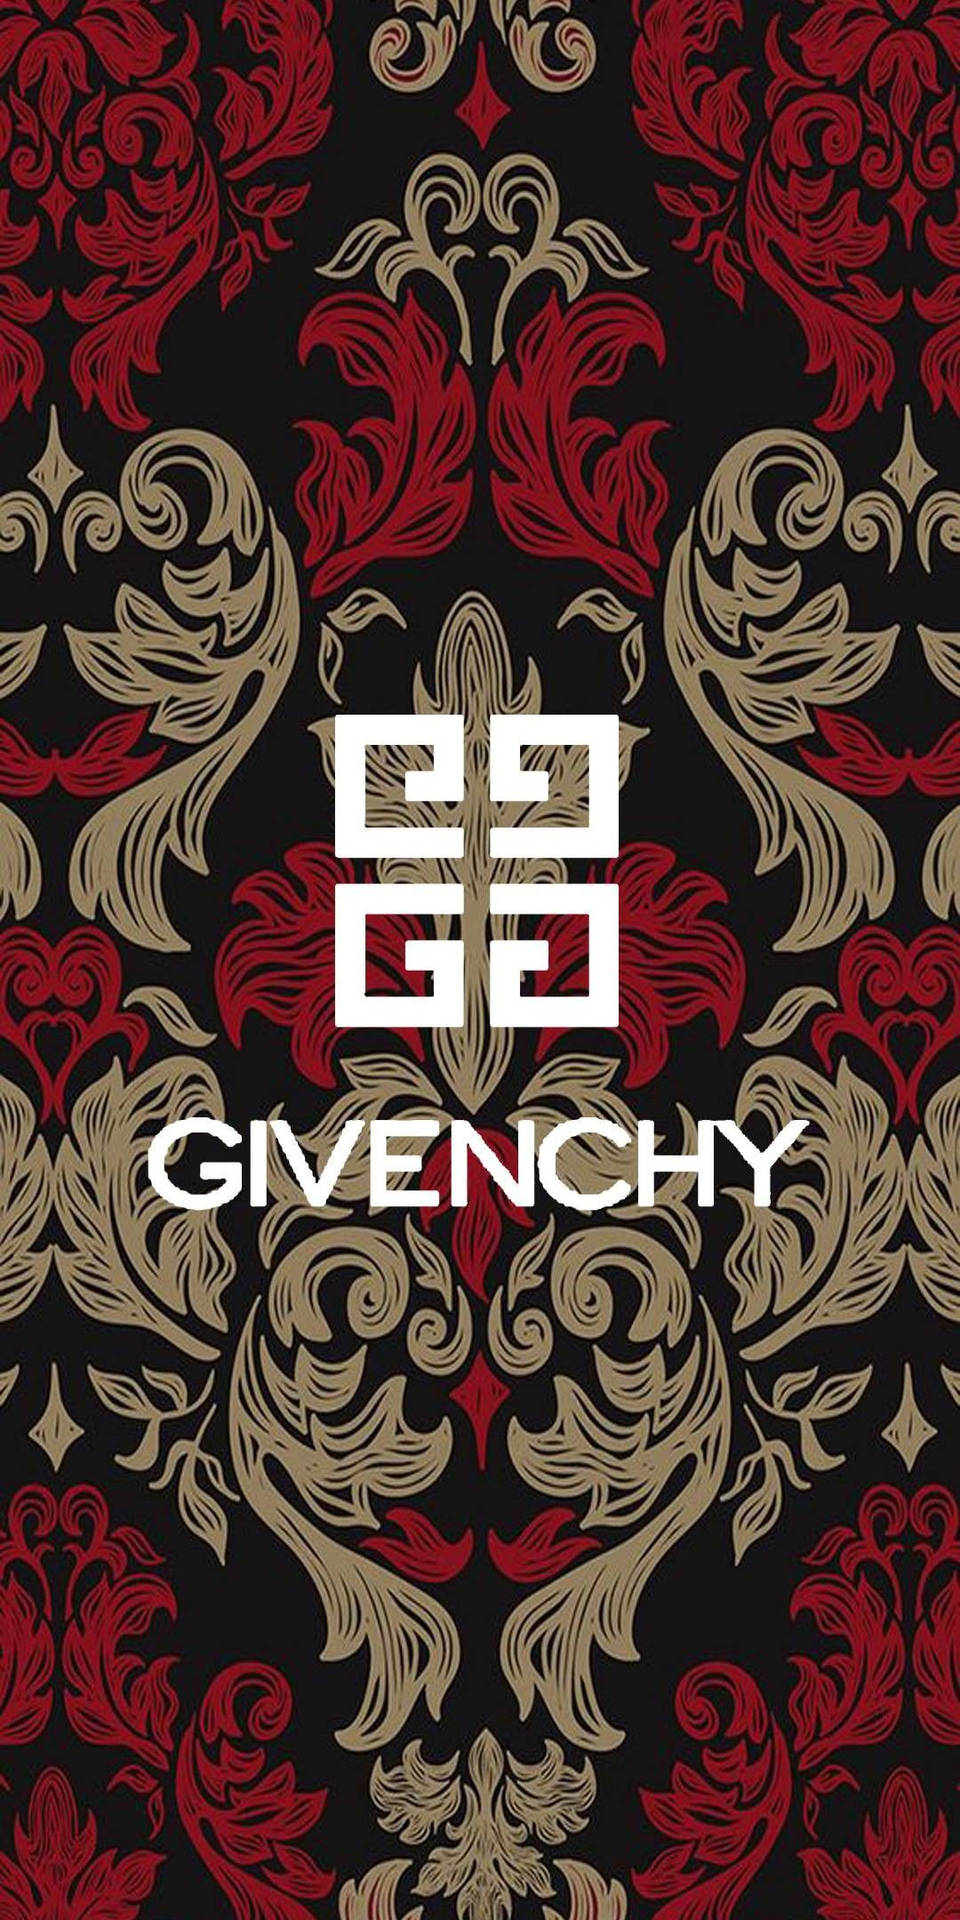 [100+] Givenchy Wallpapers | Wallpapers.com